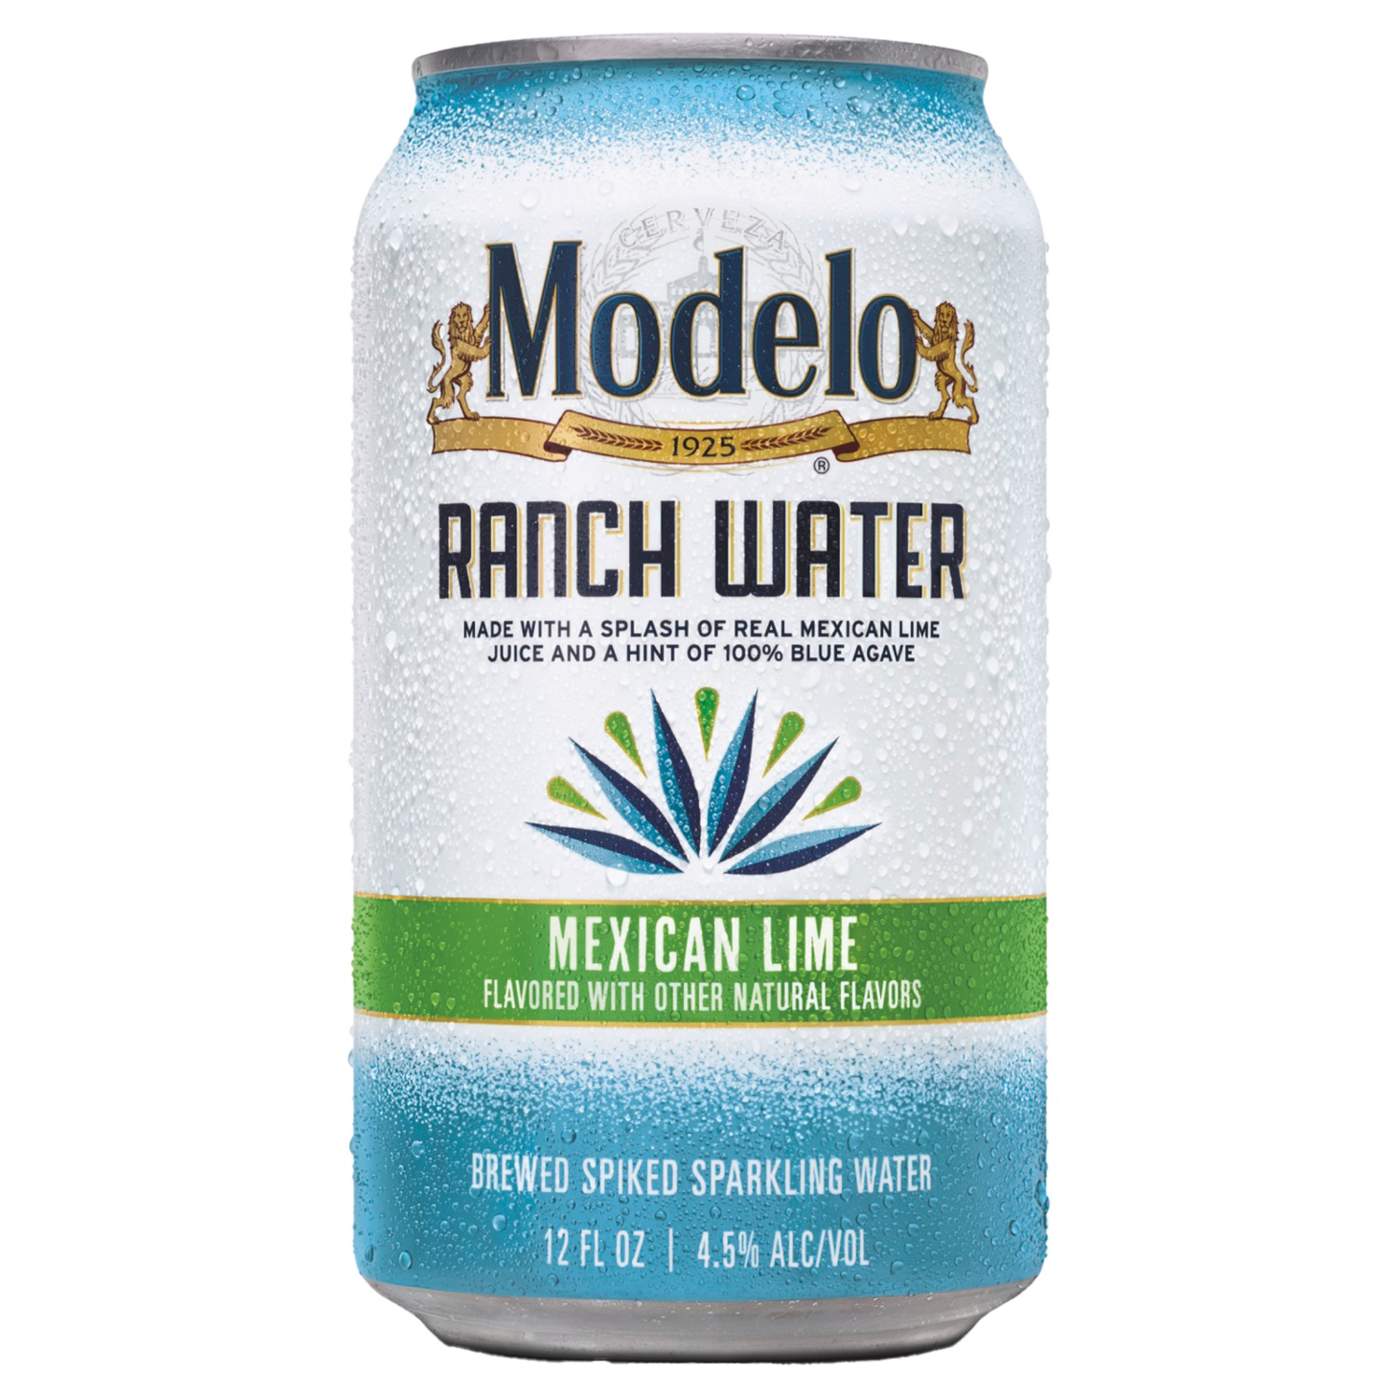 Modelo Ranch Water Spiked Sparkling Water 12 oz Cans, 6 pk; image 6 of 8